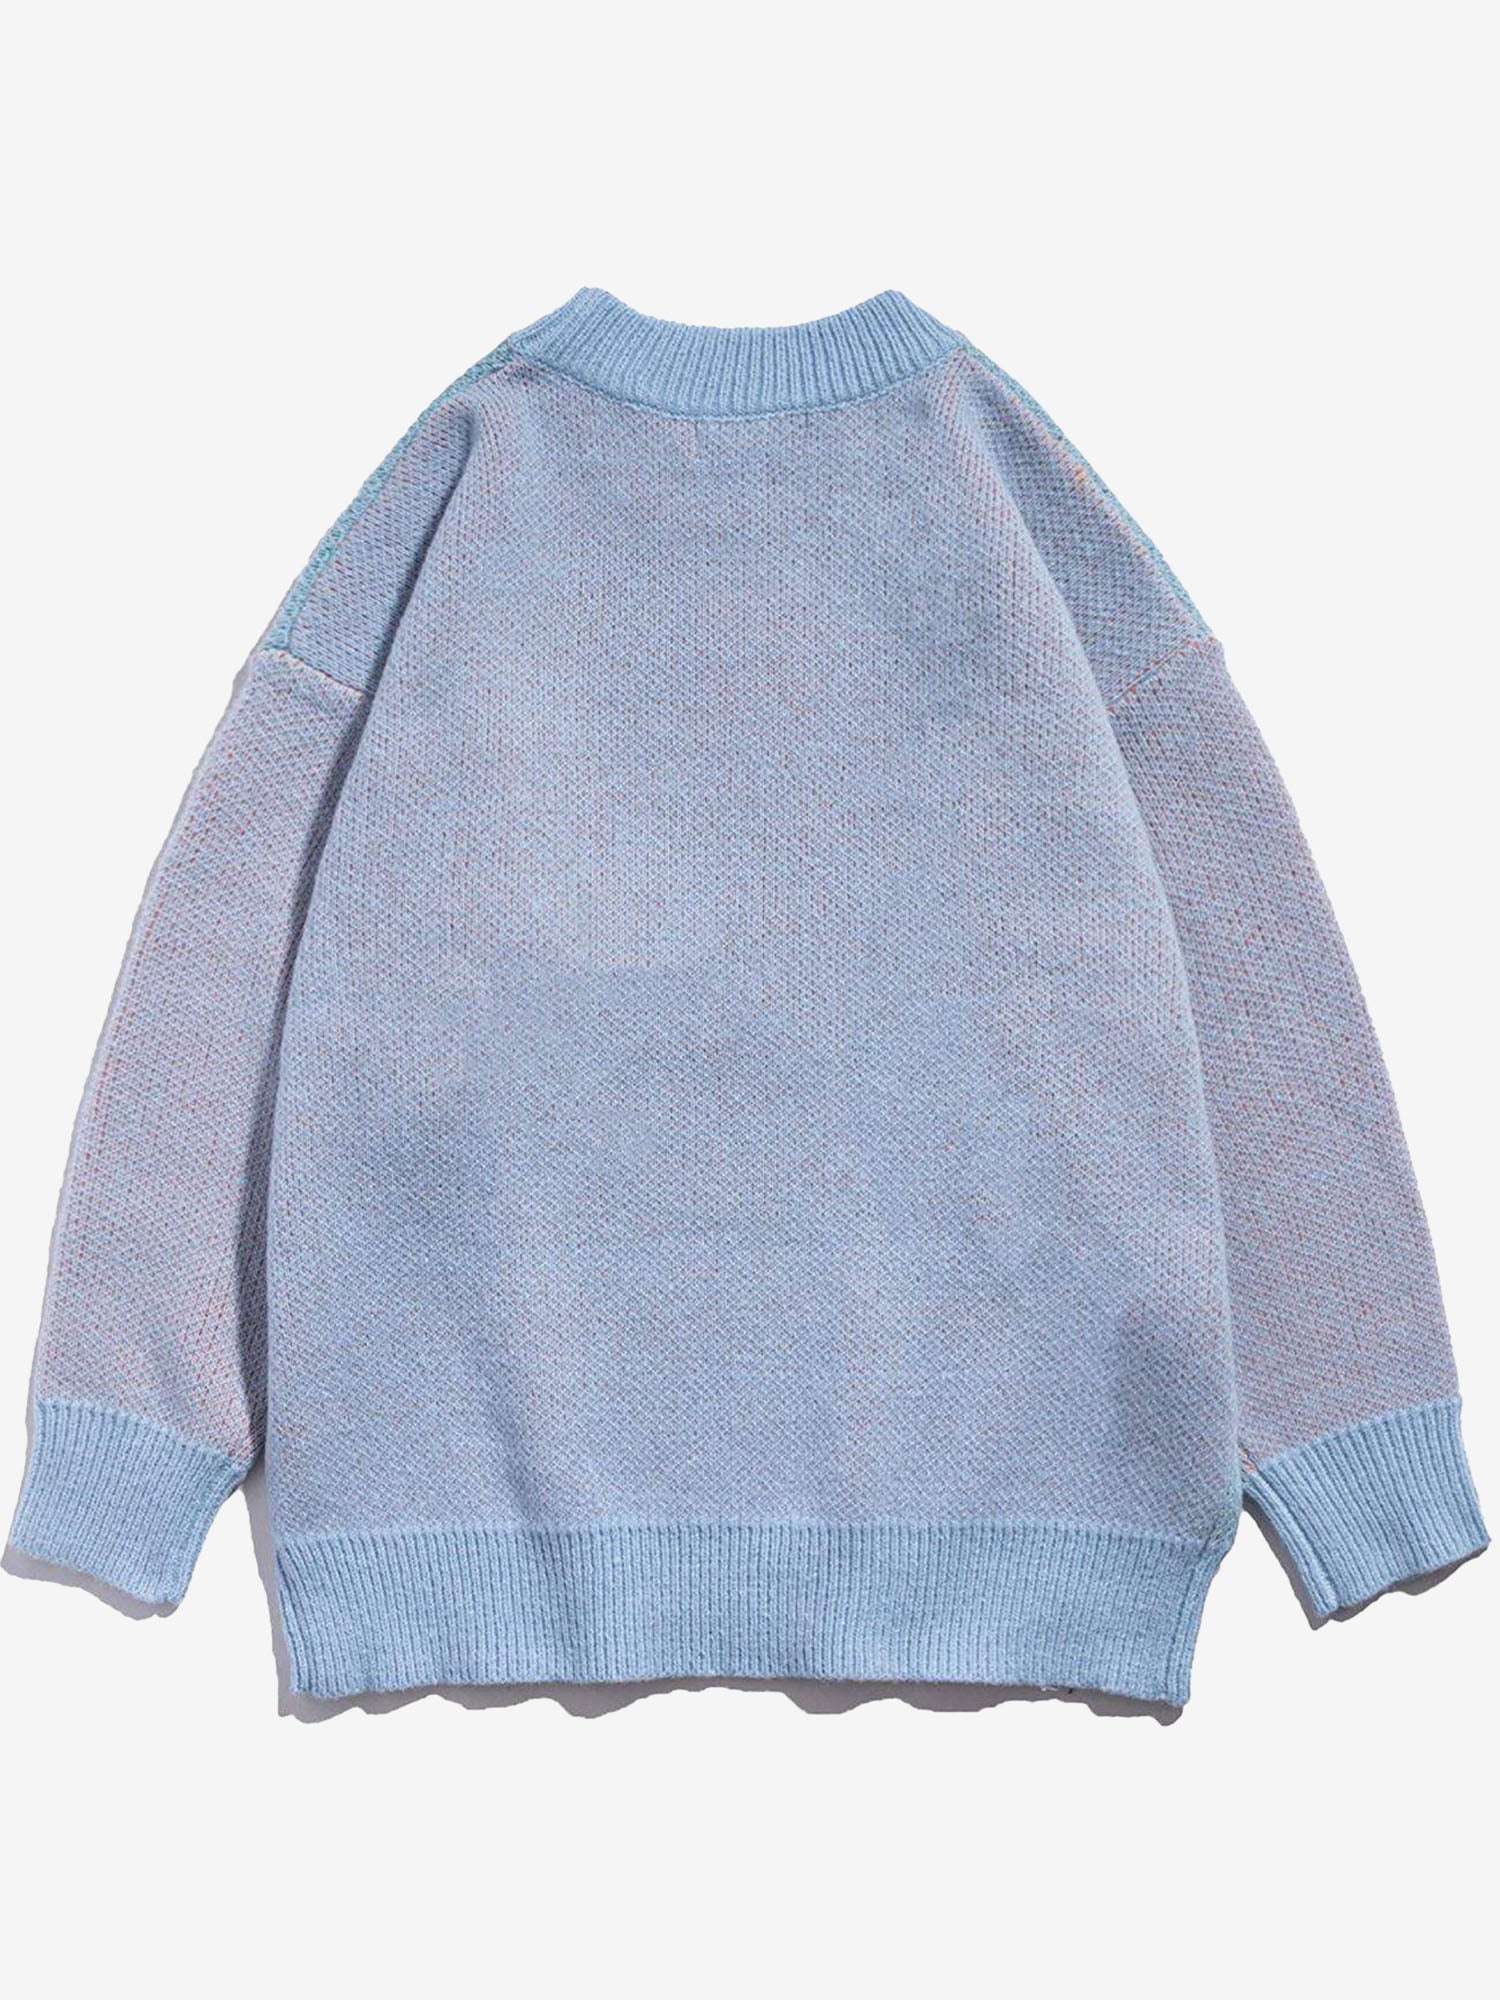 JUSTNOTAG Letter Flocking Knitted Sweater